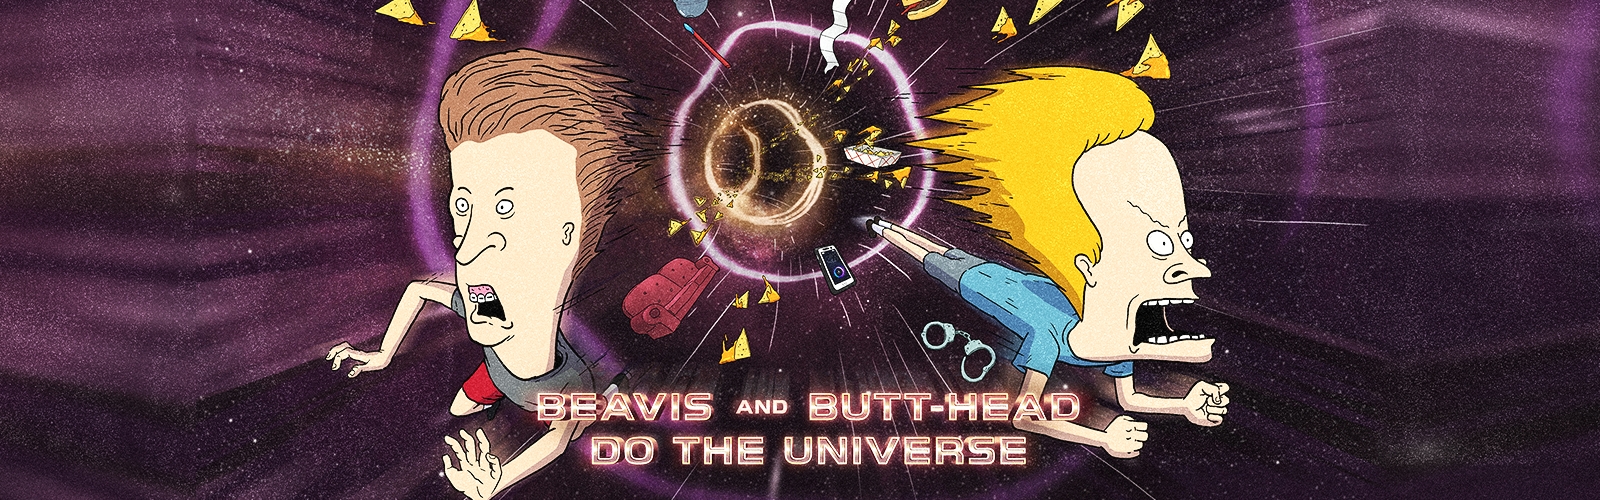 download beavis and butthead do the universe paramount